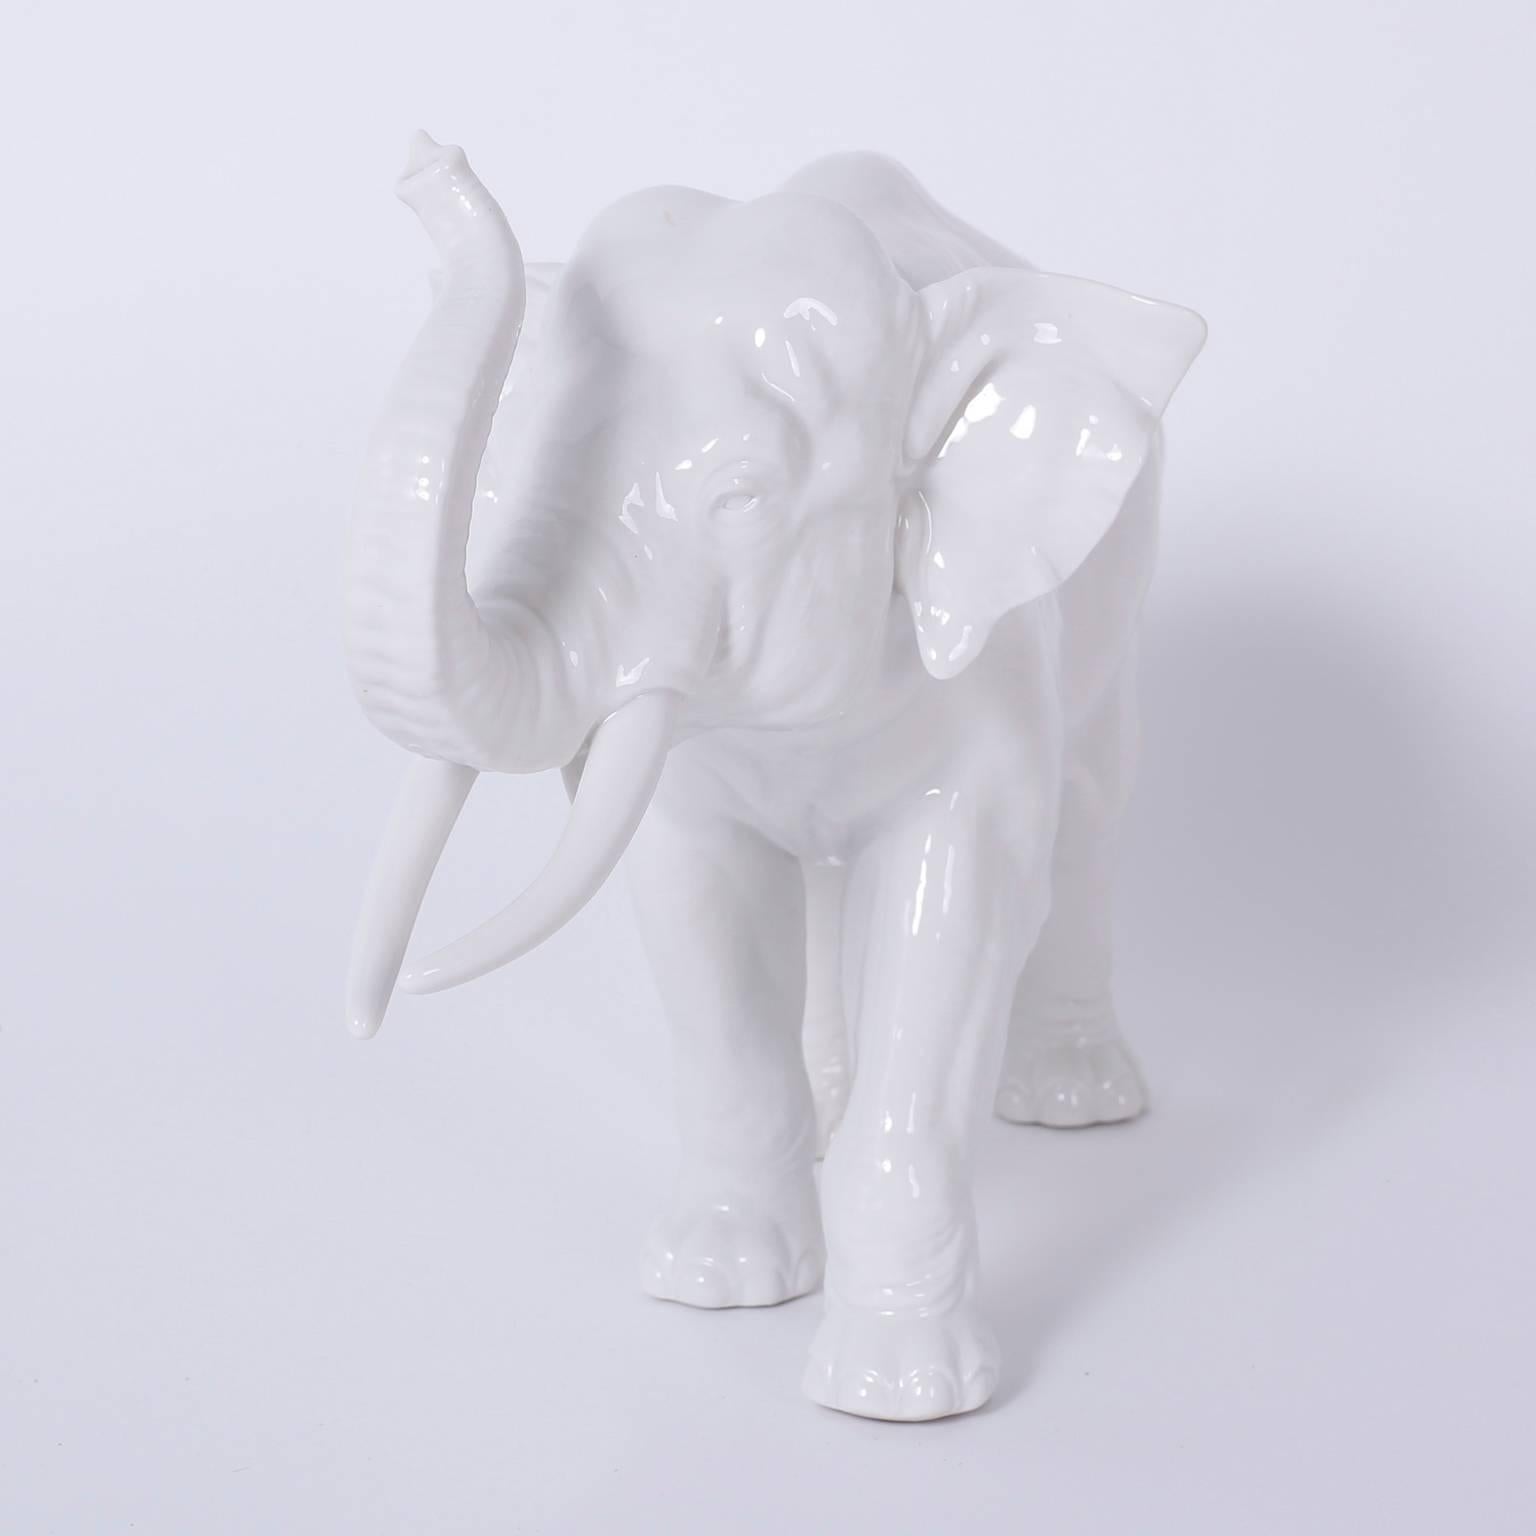 Fine porcelain elephant designed in 1931 by Josef Wackerle and
manufactured by the Nymphenberg porcelain company in Germany.